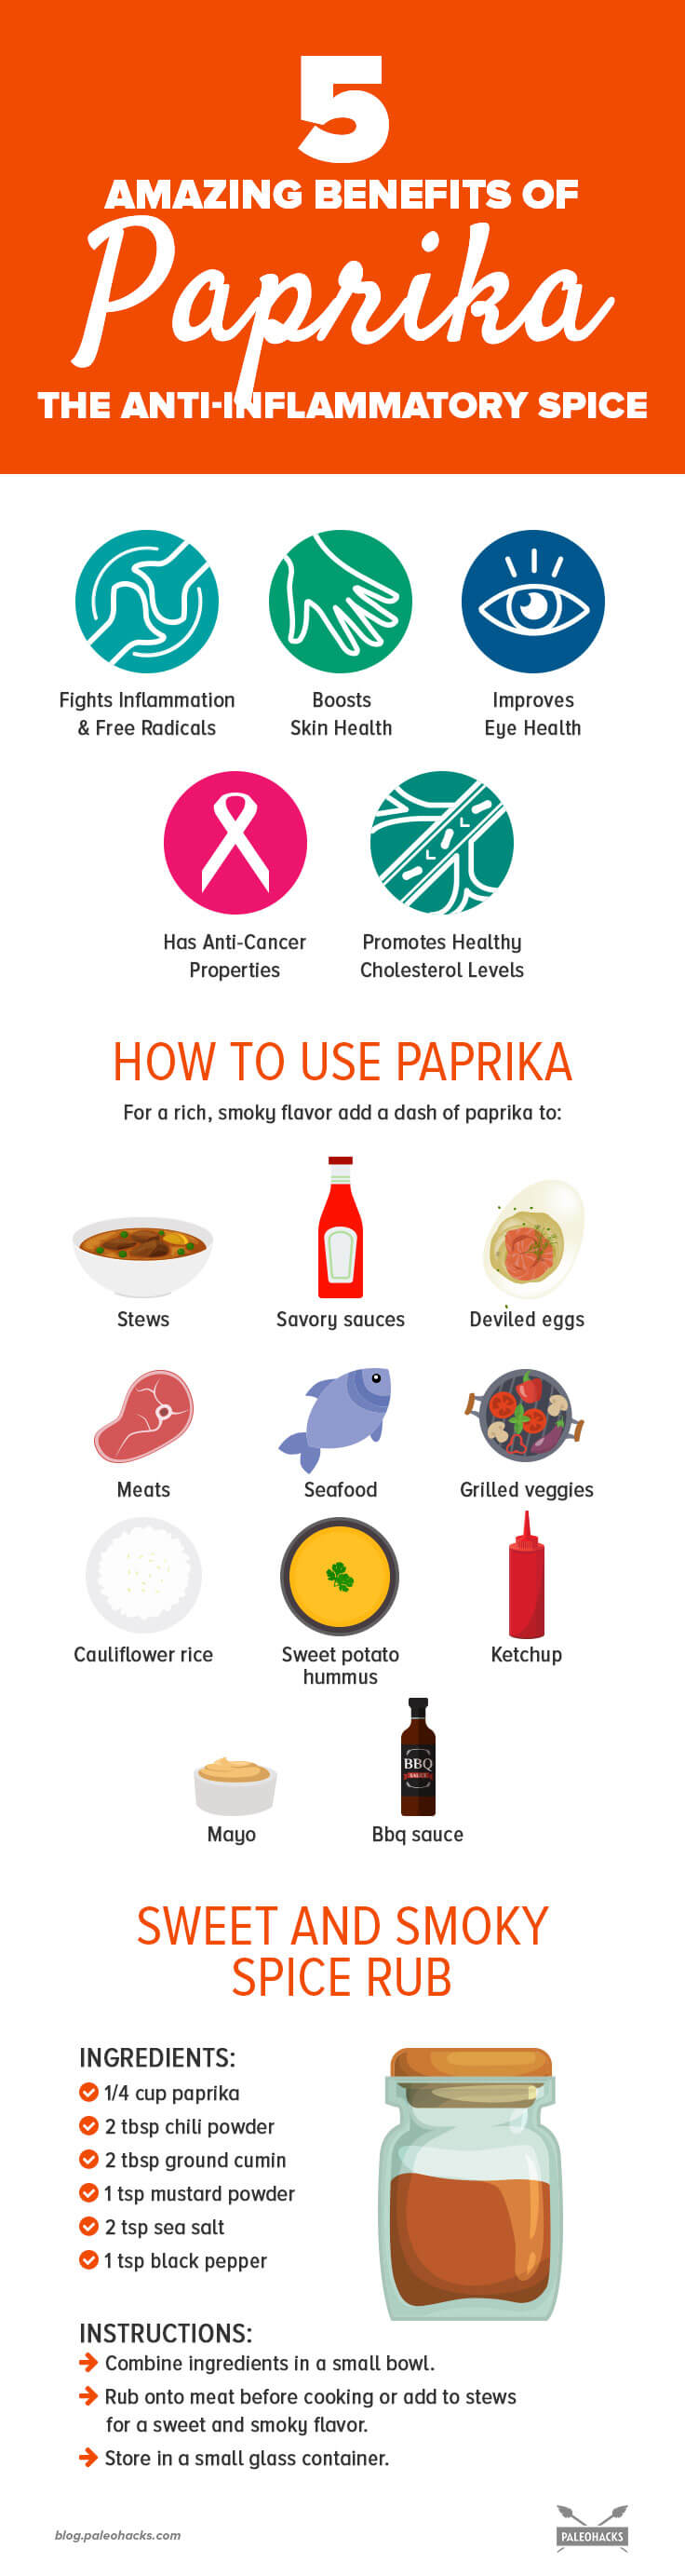 Research reveals that paprika has a lot more to offer than just smoky flavor. This anti-inflammatory spice helps improve skin, eyes, and fights cancer!